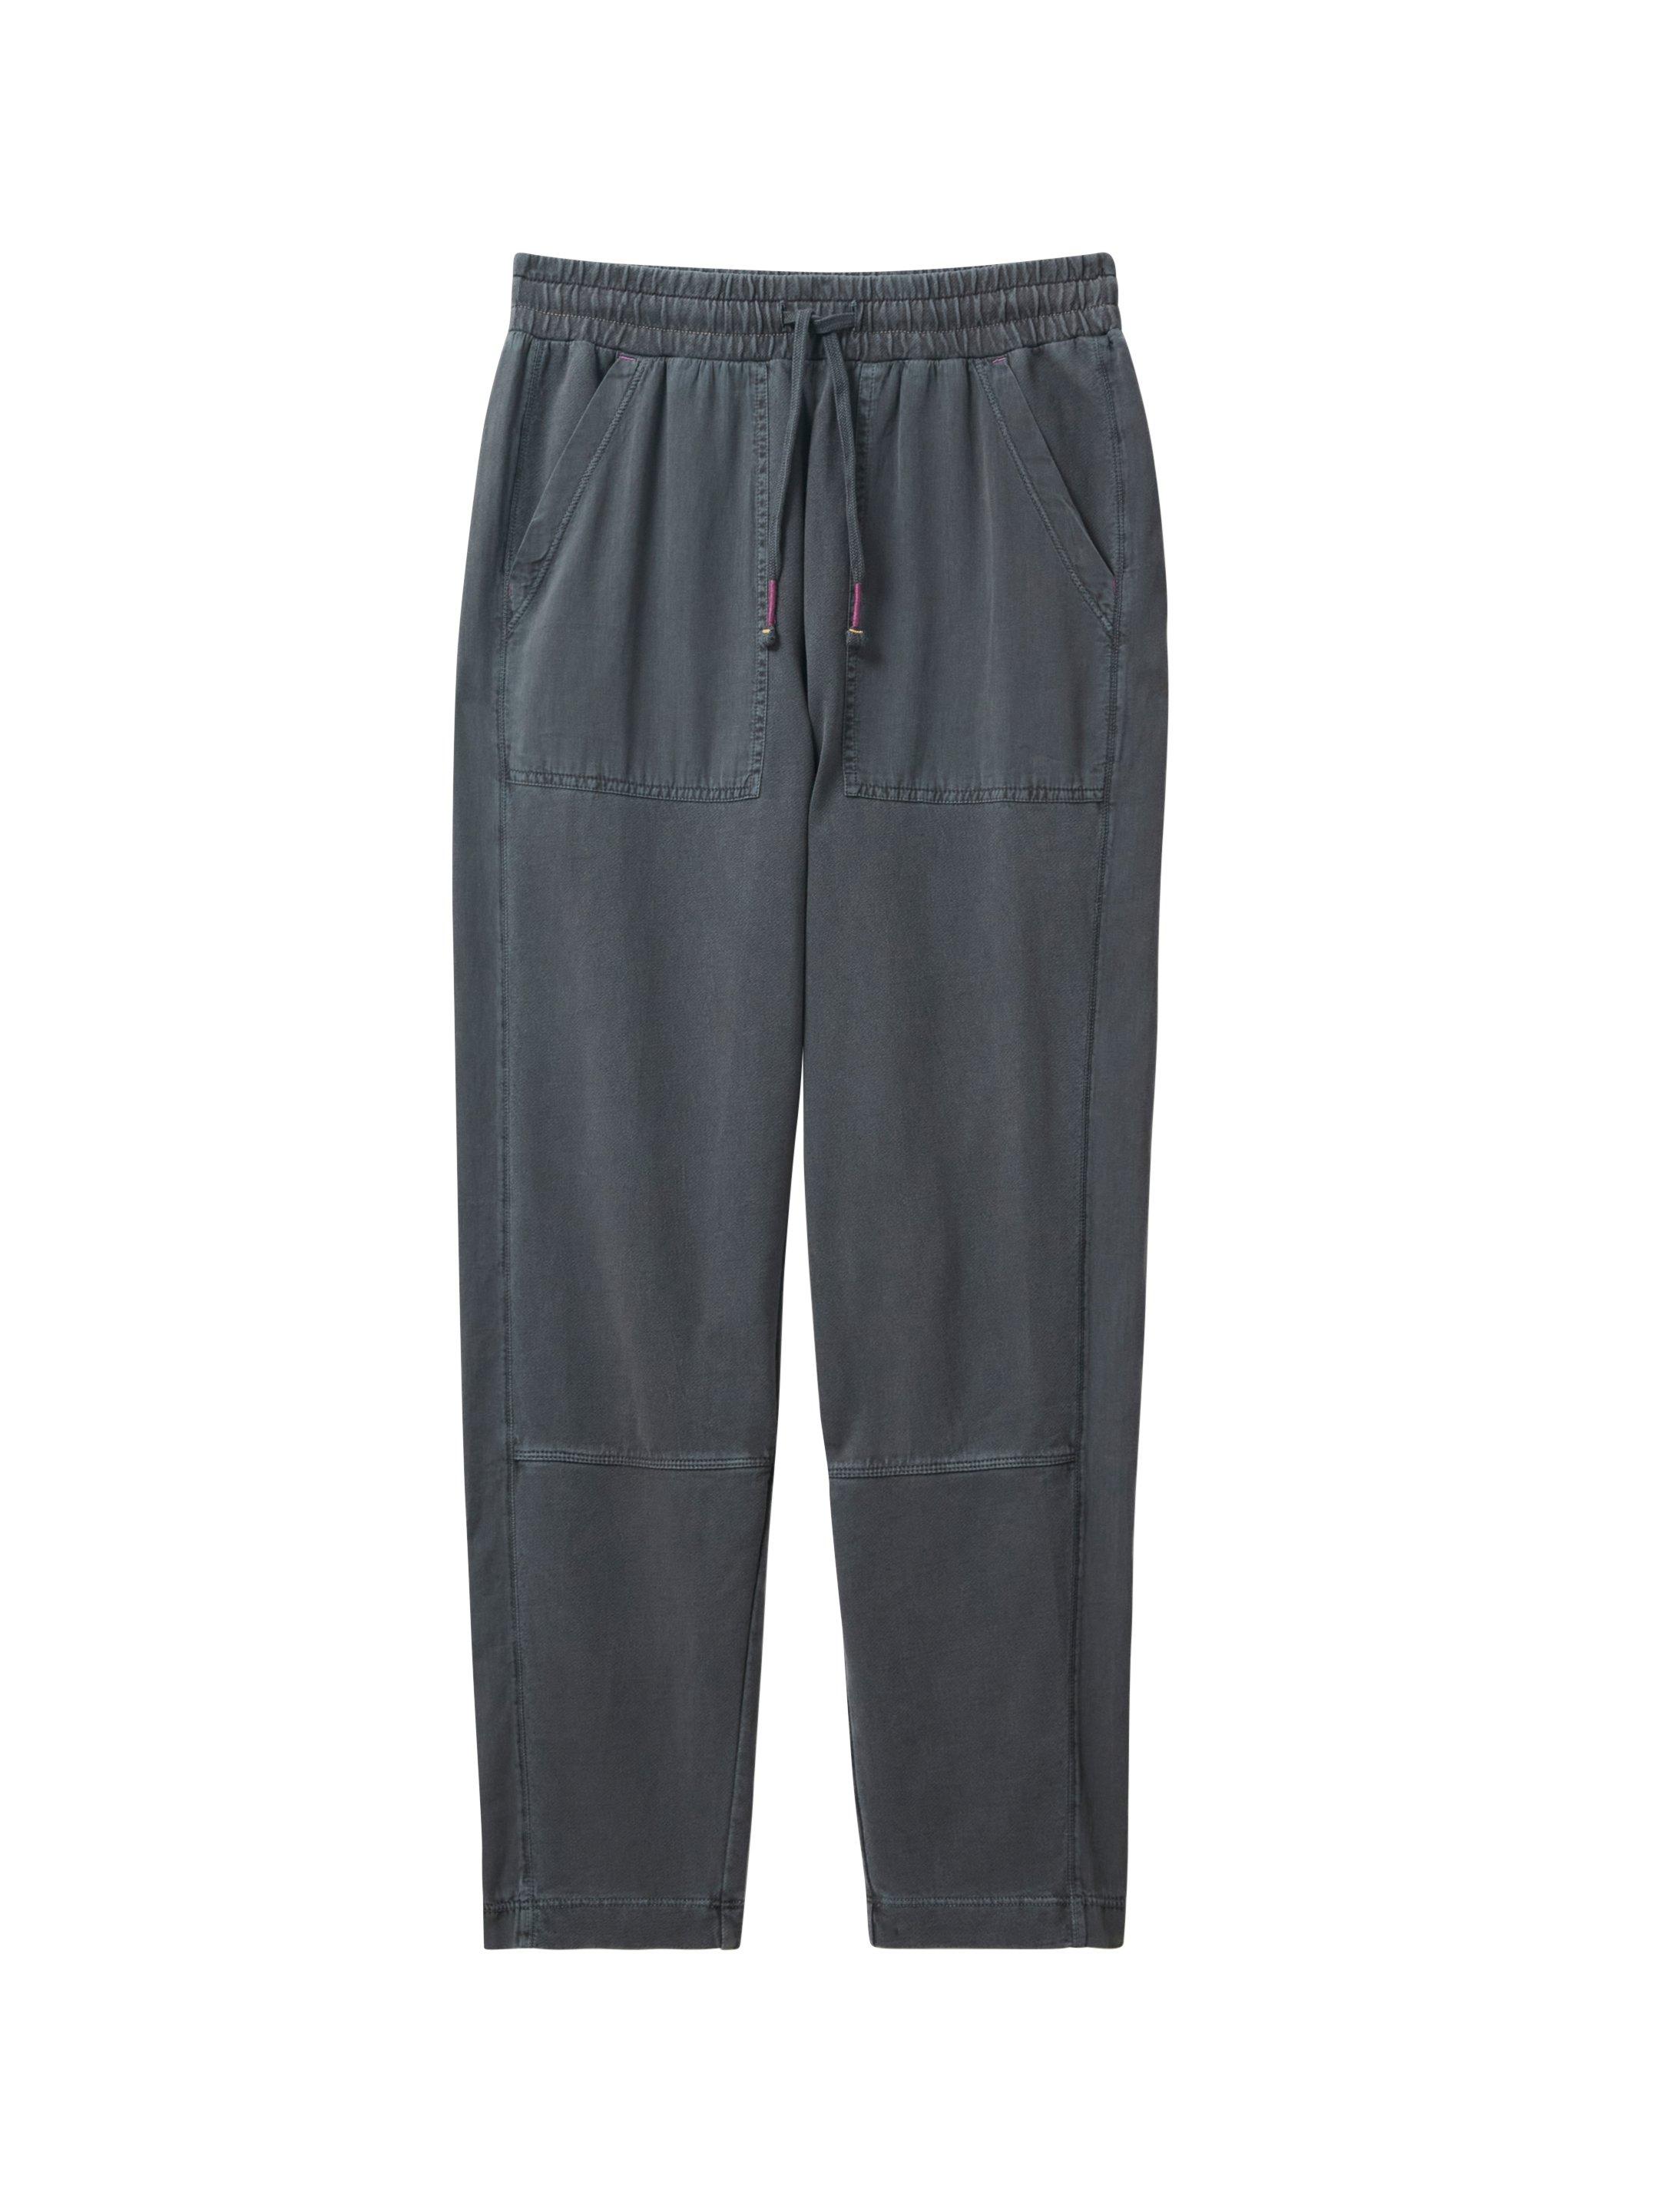 Ava Jersey Jogger in DK GREY - FLAT FRONT